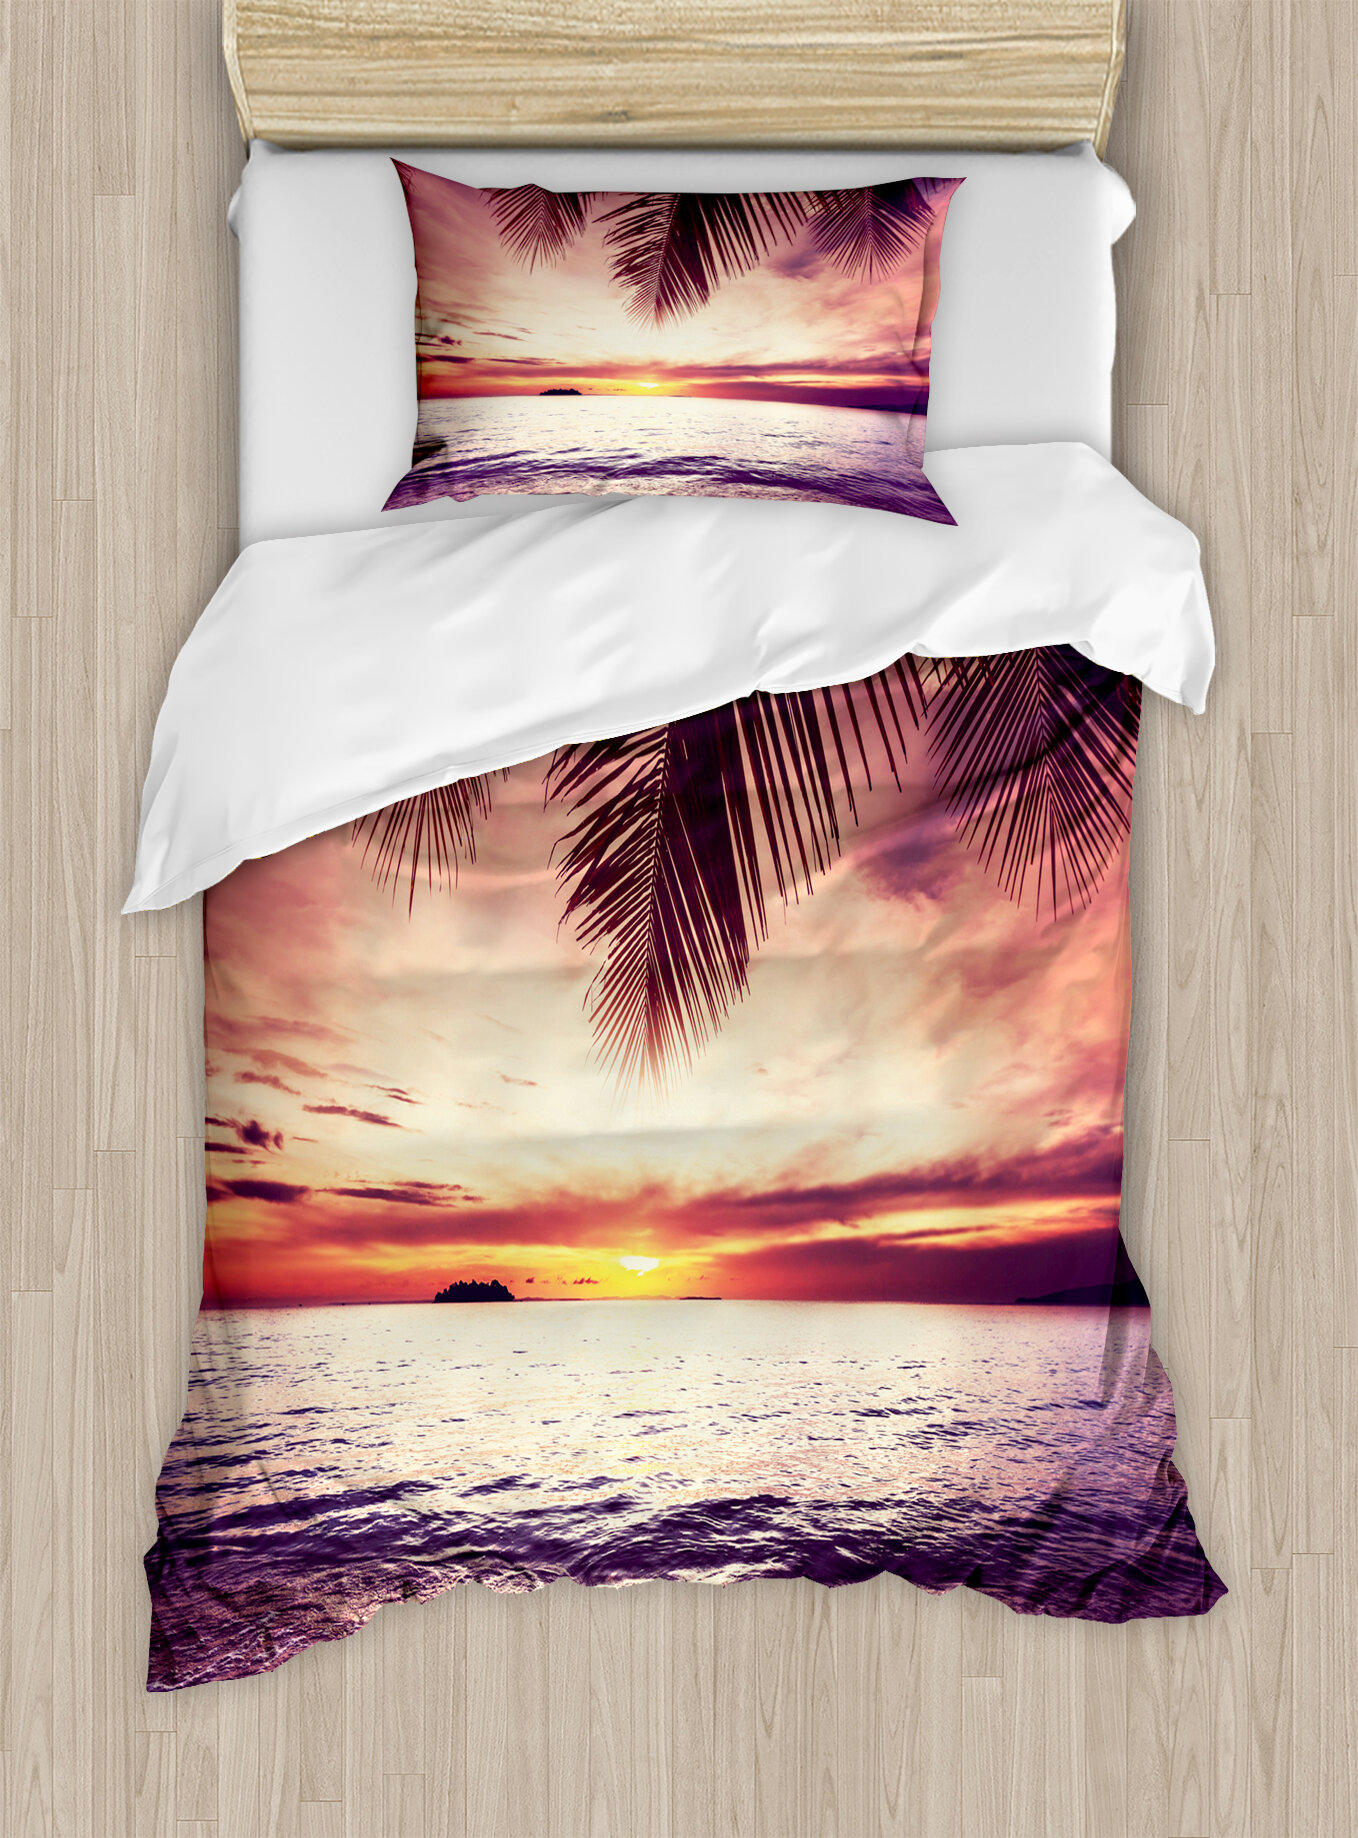 East Urban Home Palm Tree Tropical Beach Under Shadow At Sunset